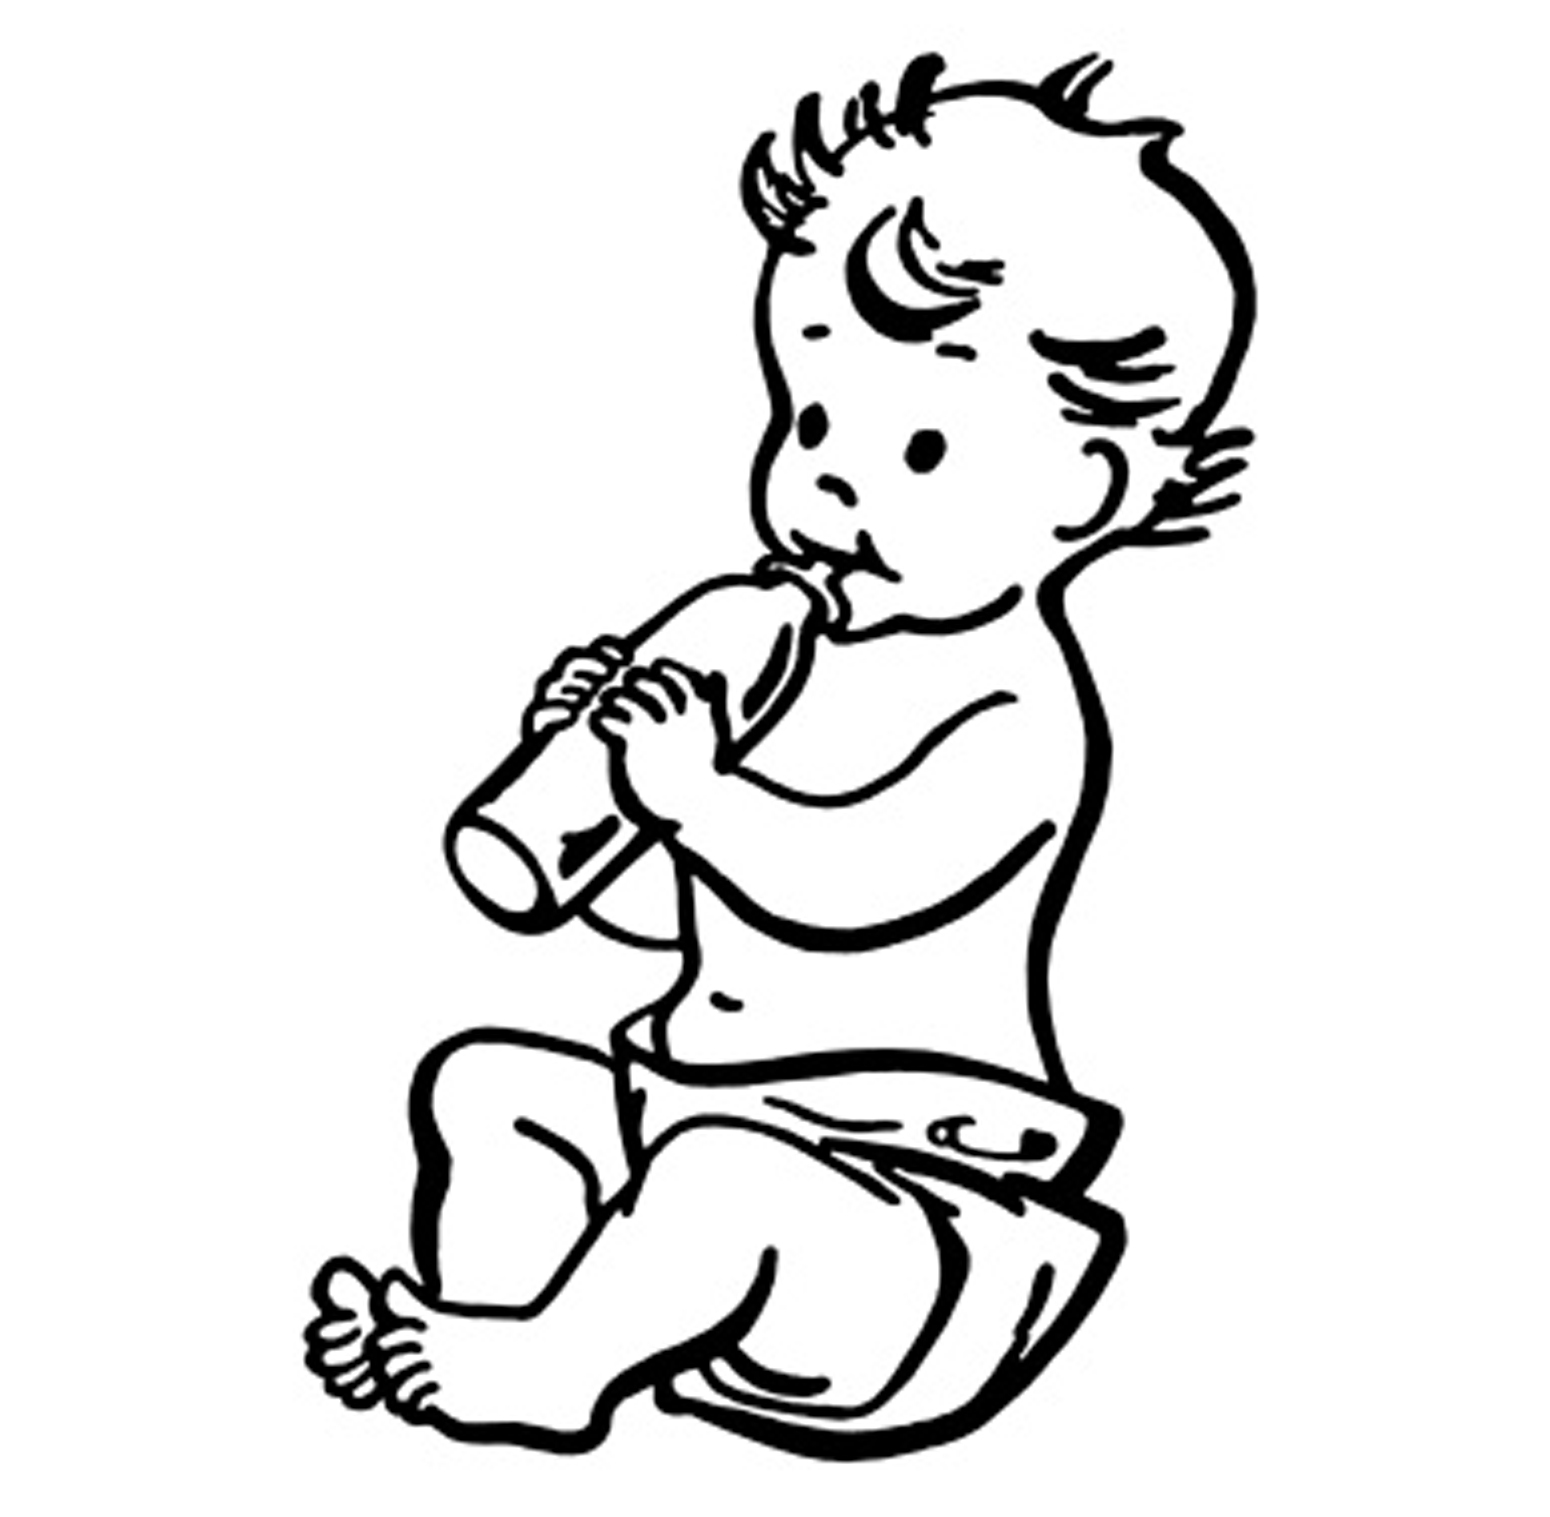 clipart baby black and white - photo #10